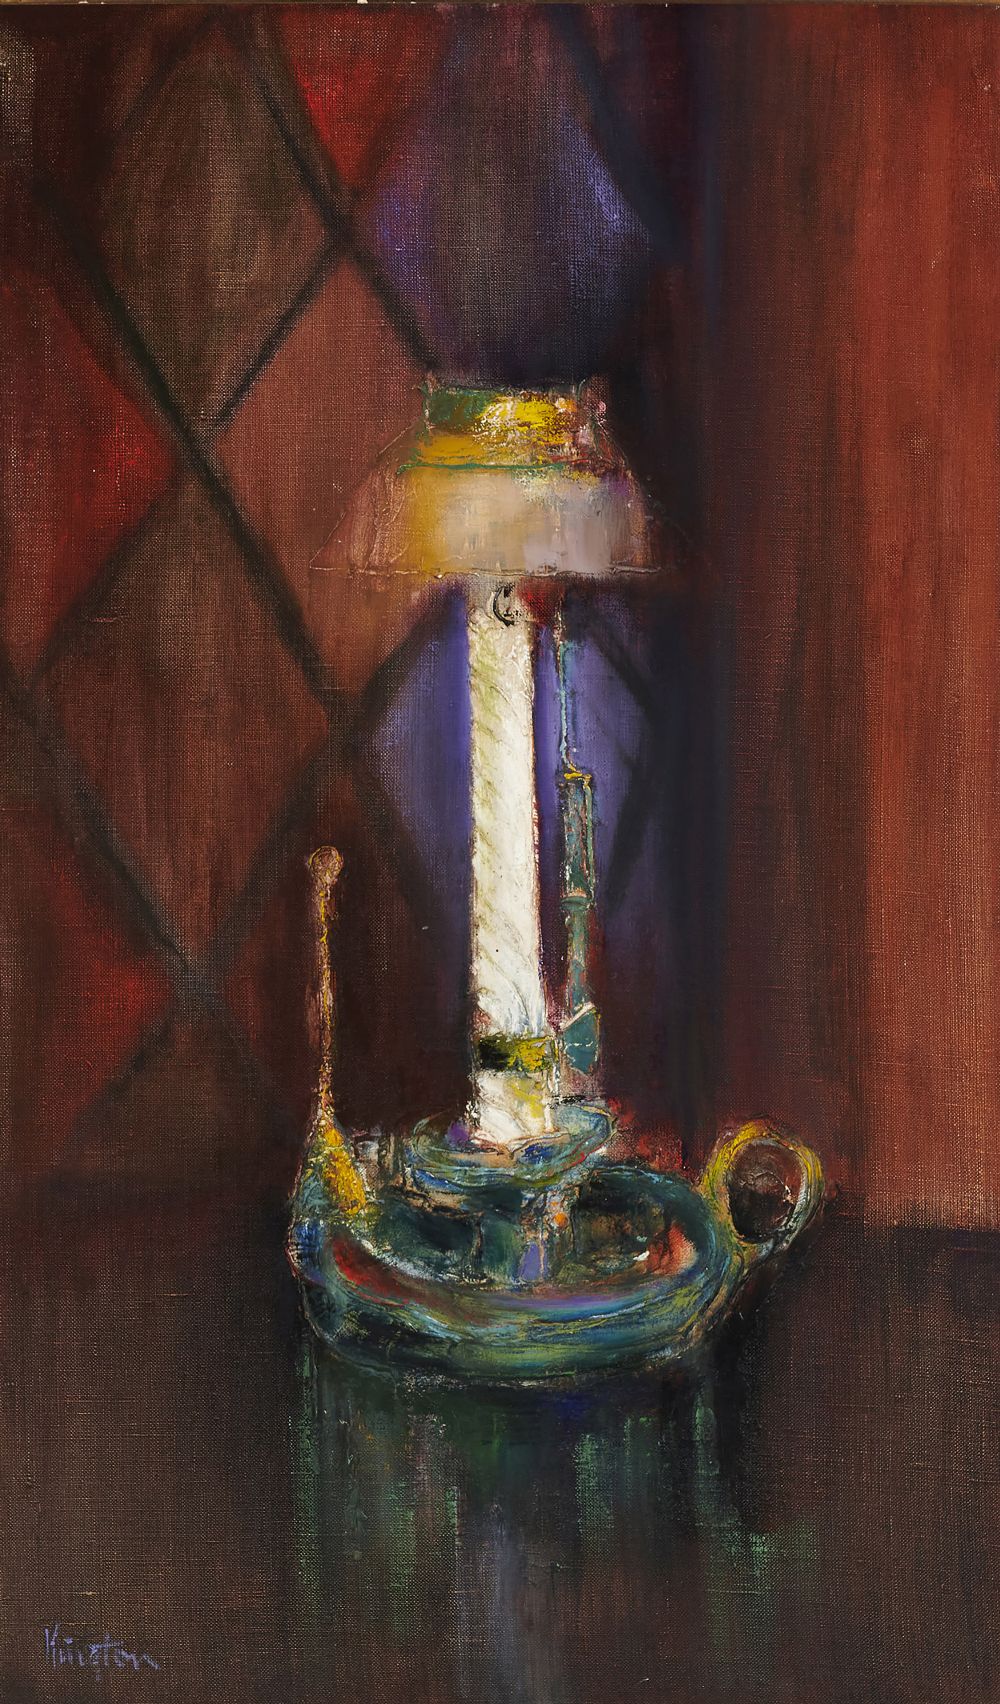 Lot 92 - THE CANDLE by Richard Kingston